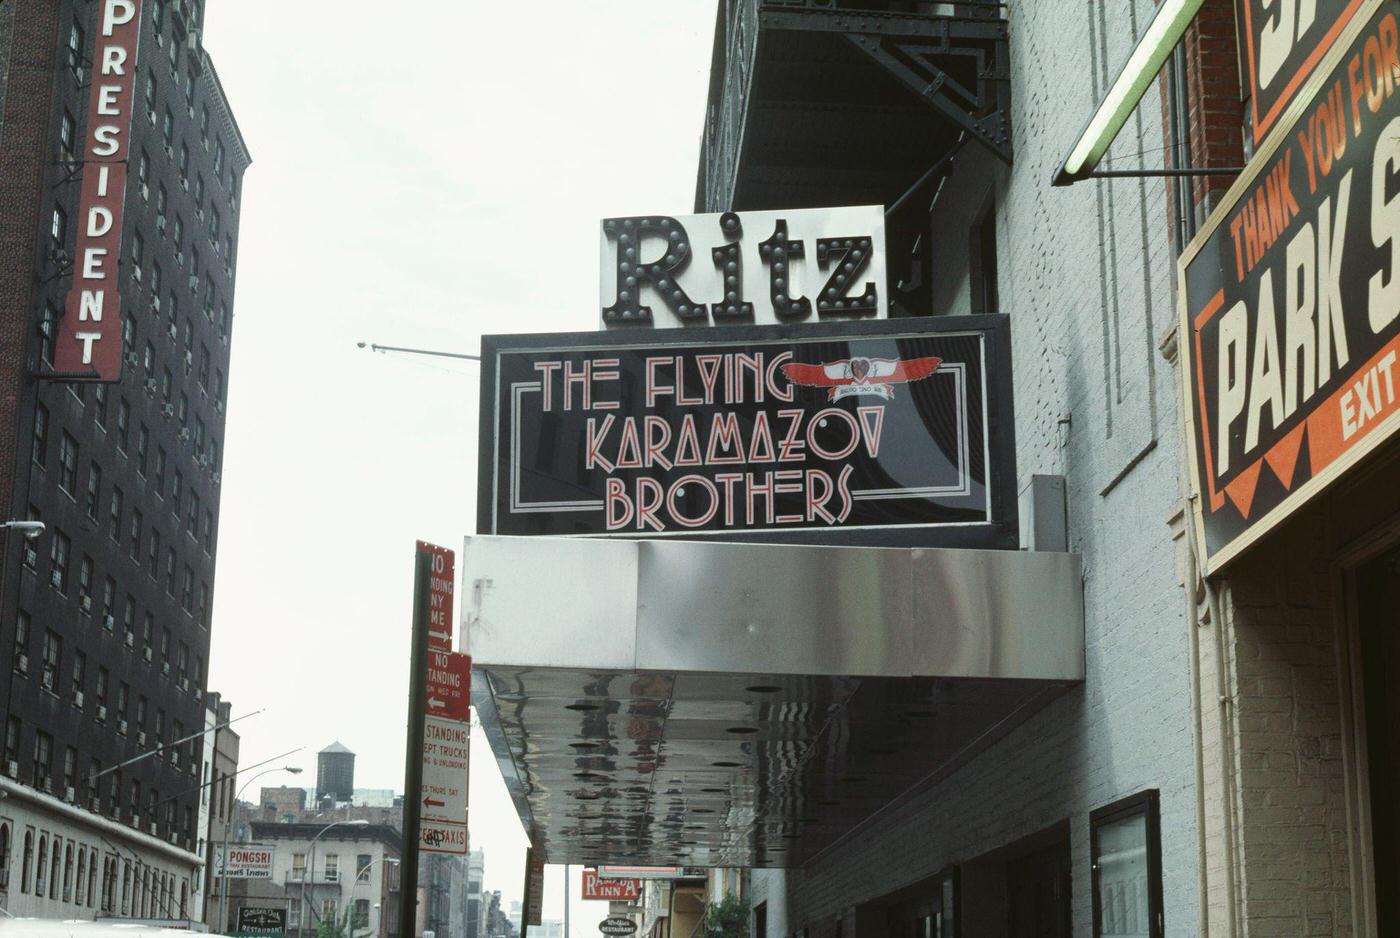 Ritz Theatre Staging A Production By 'The Flying Karamazov Brothers', Broadway, Midtown Manhattan, 1985